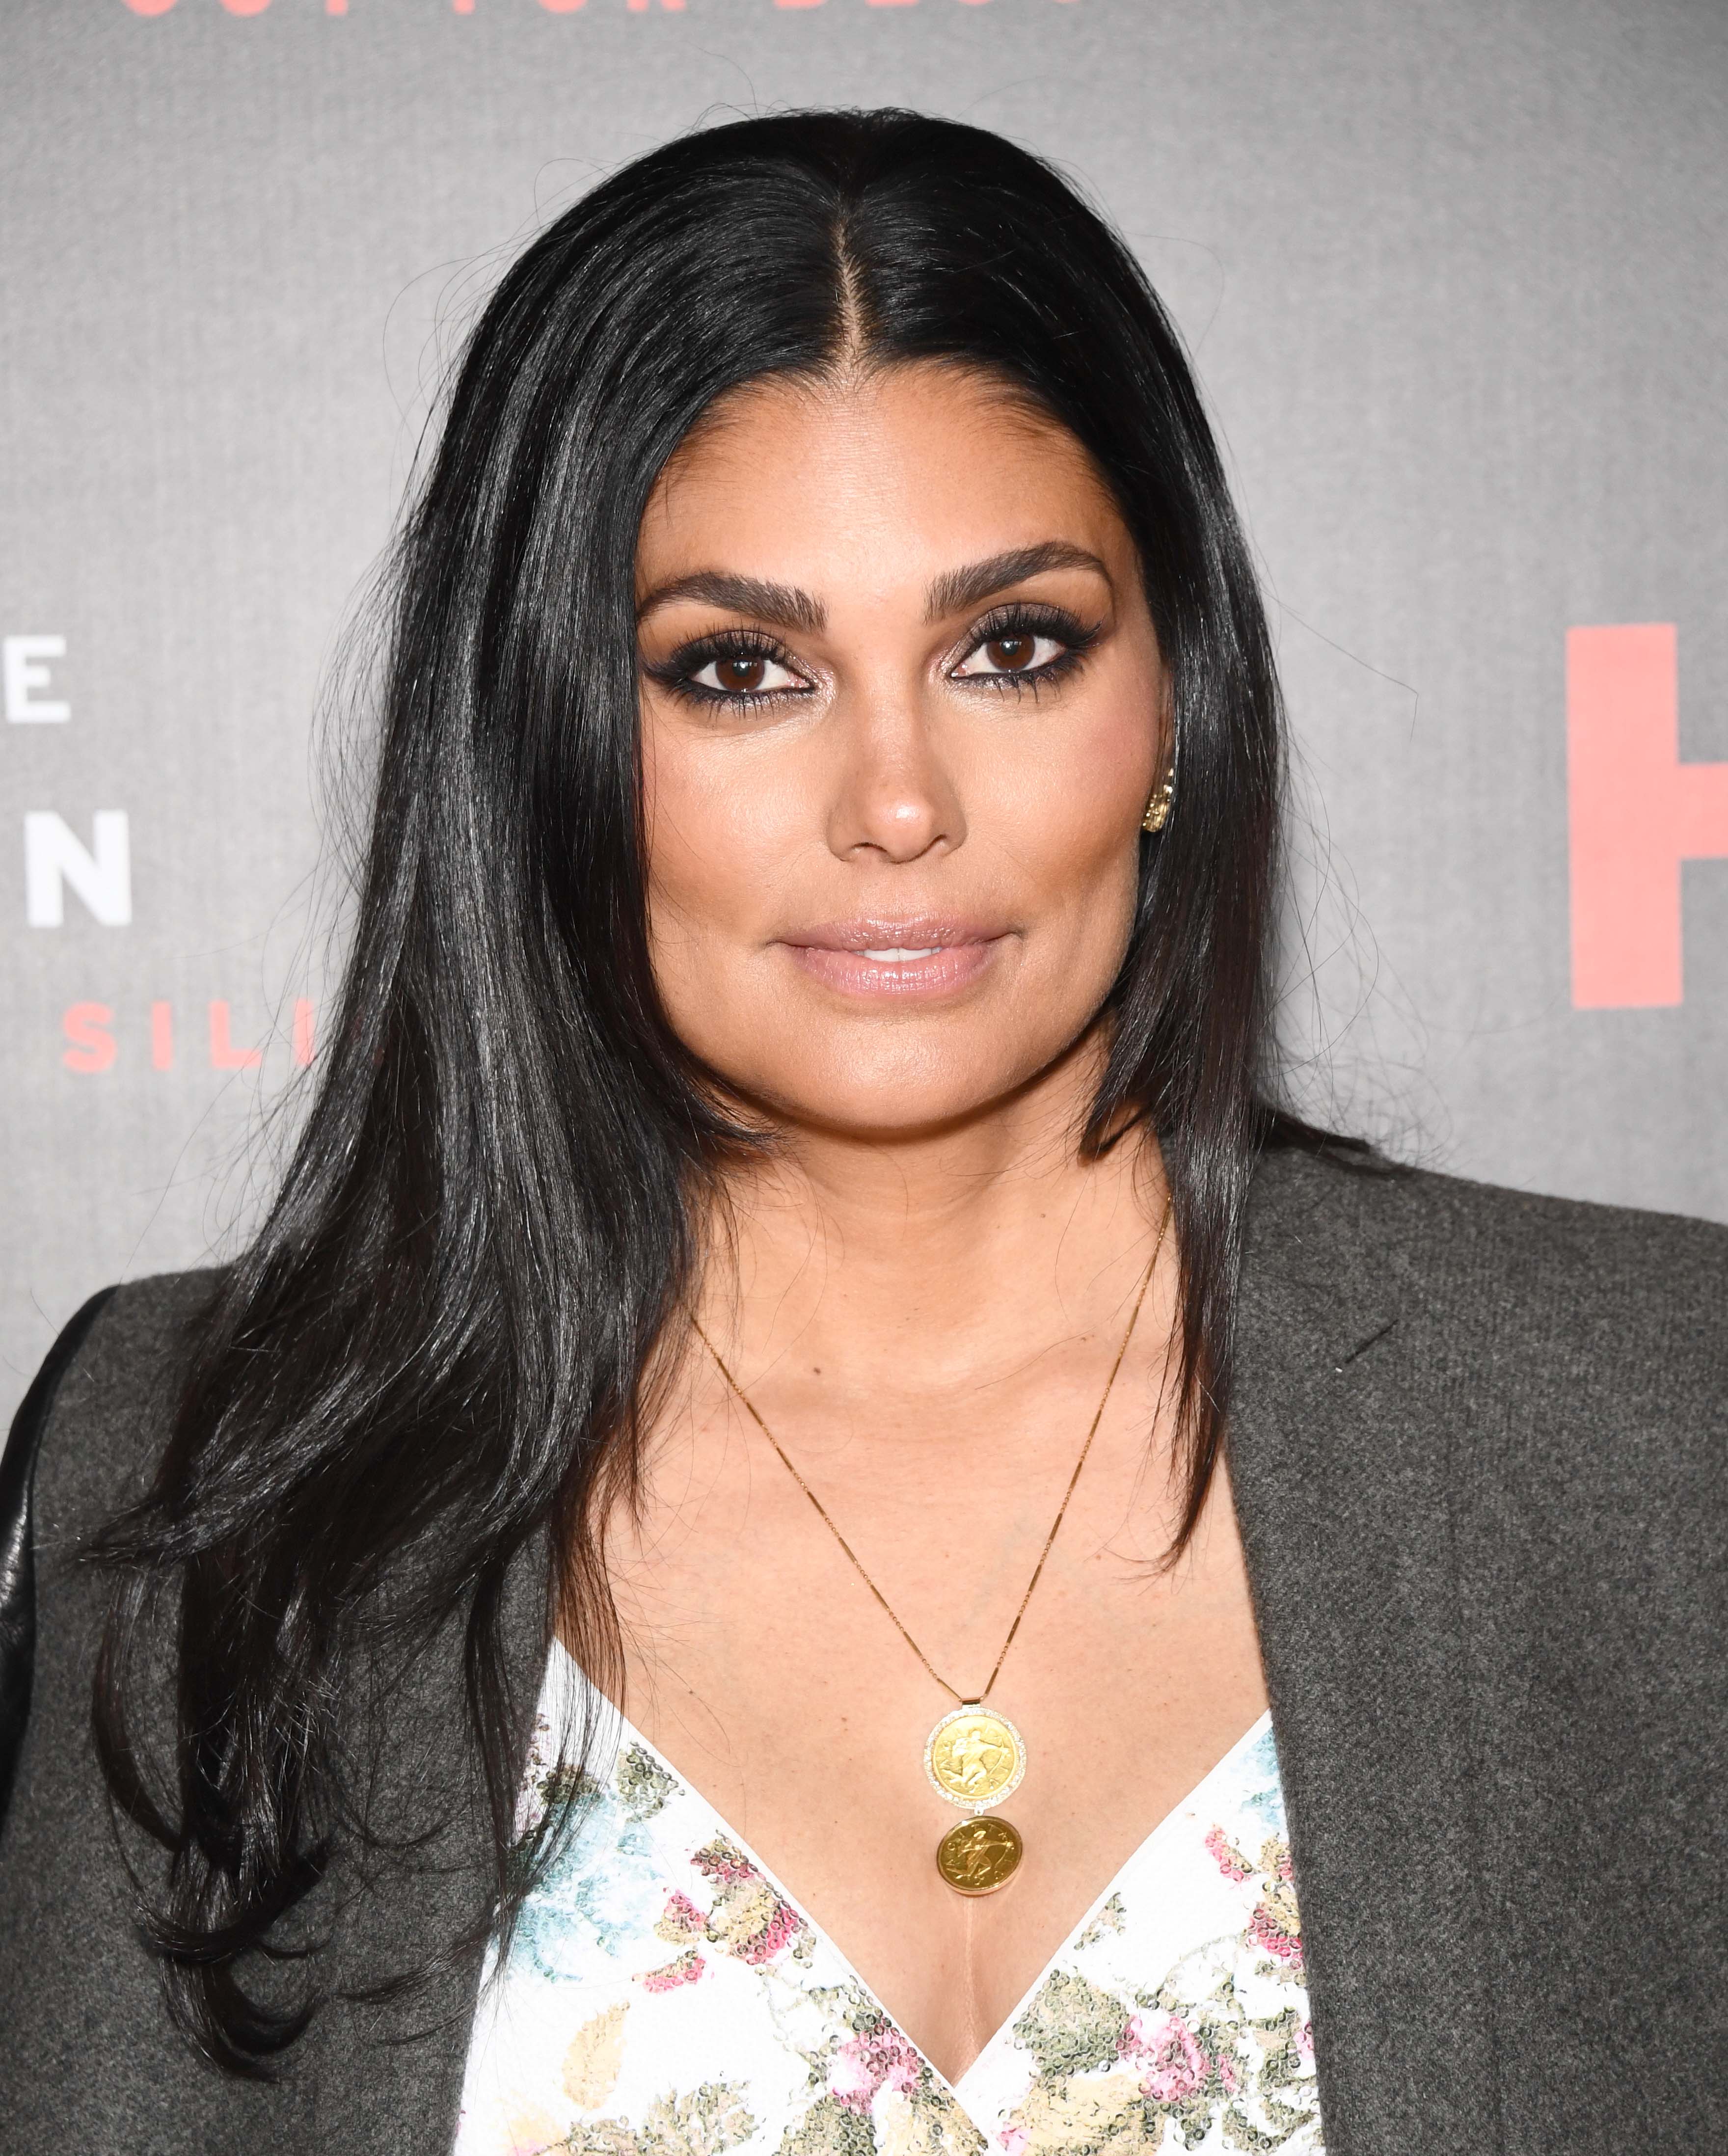 Rachel Roy attending the premiere of  HBO's "The Inventor" in February 2019 in New York. | Photo: Getty Images